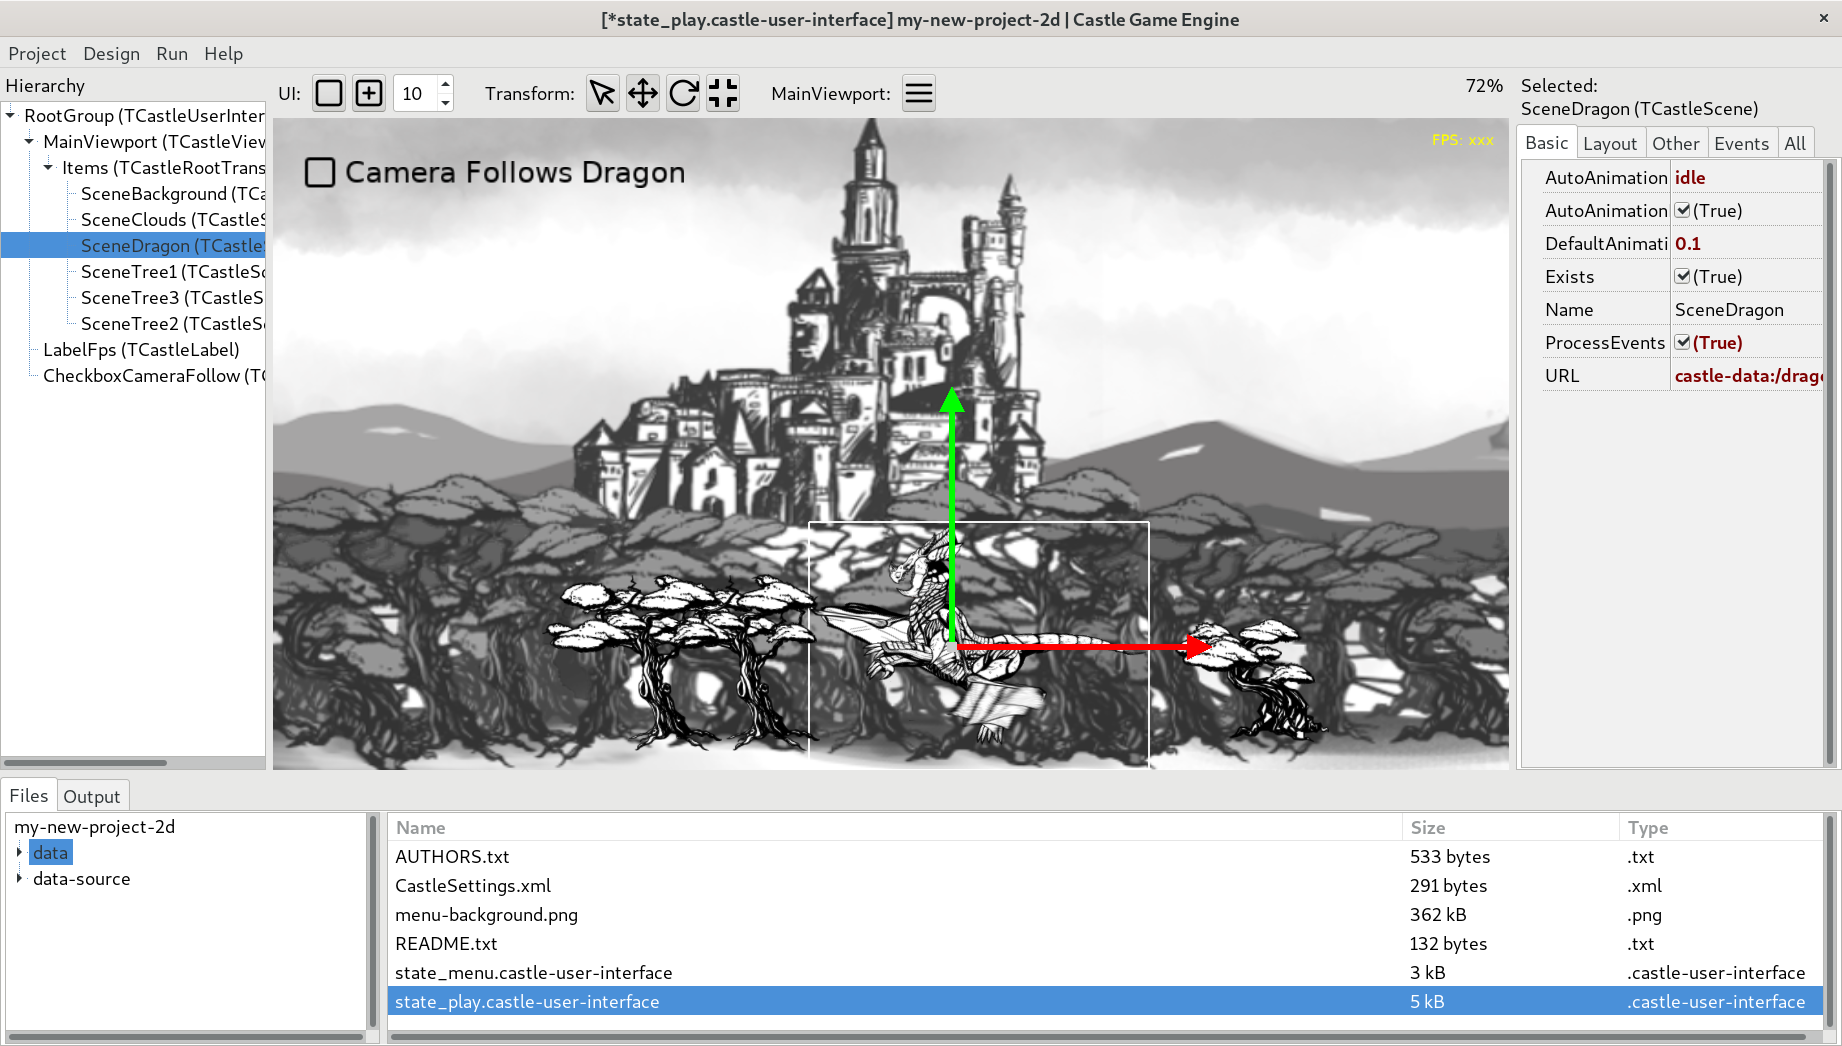 castle game engine gizmo2d.png